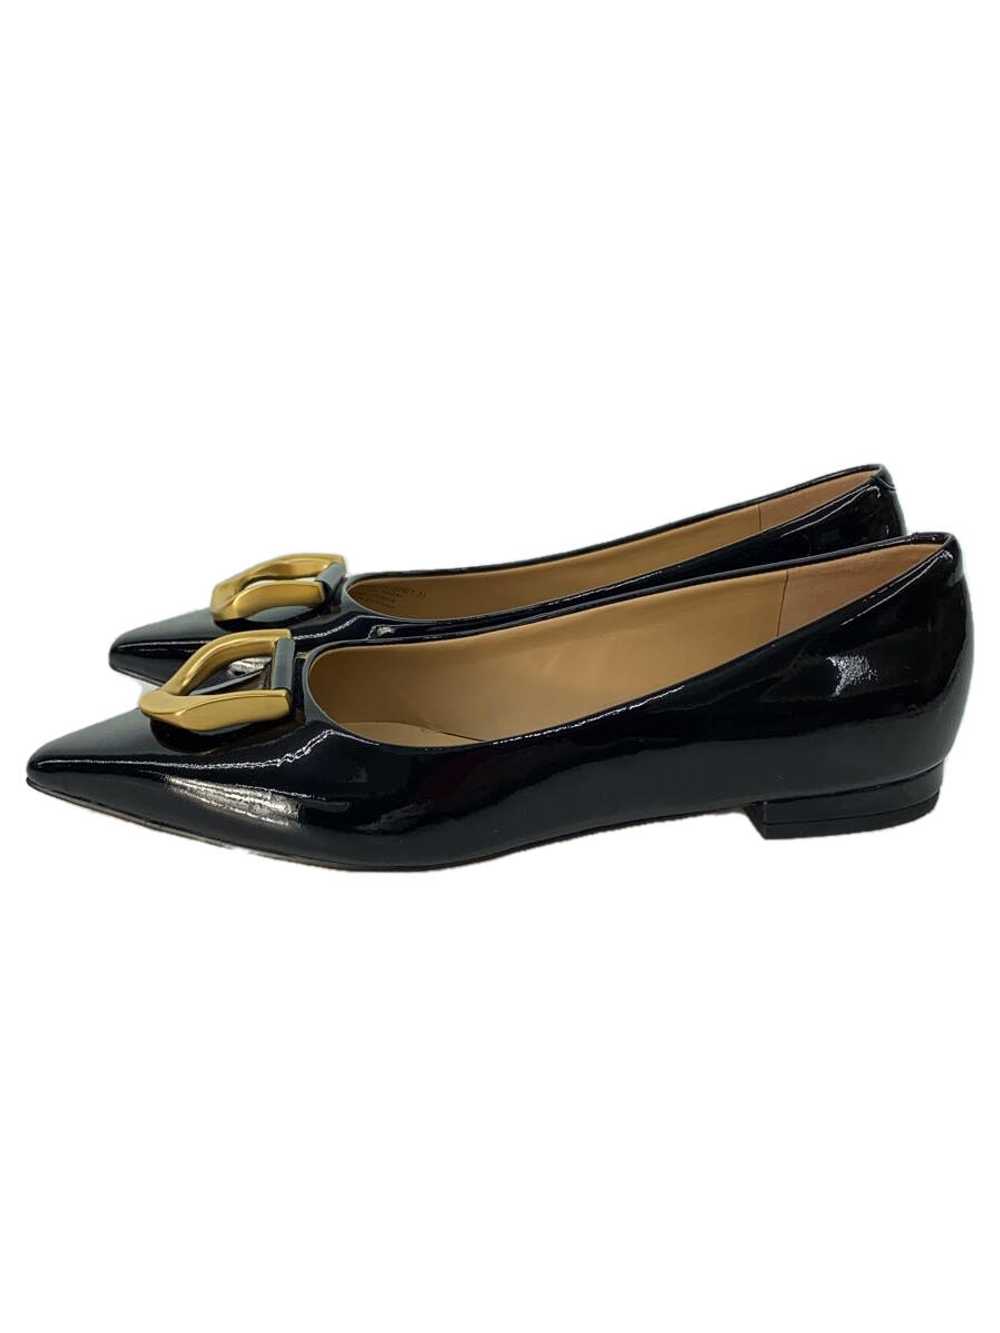 Charles&Keith Flat Pumps/35/Blk Shoes BbA20 - image 1